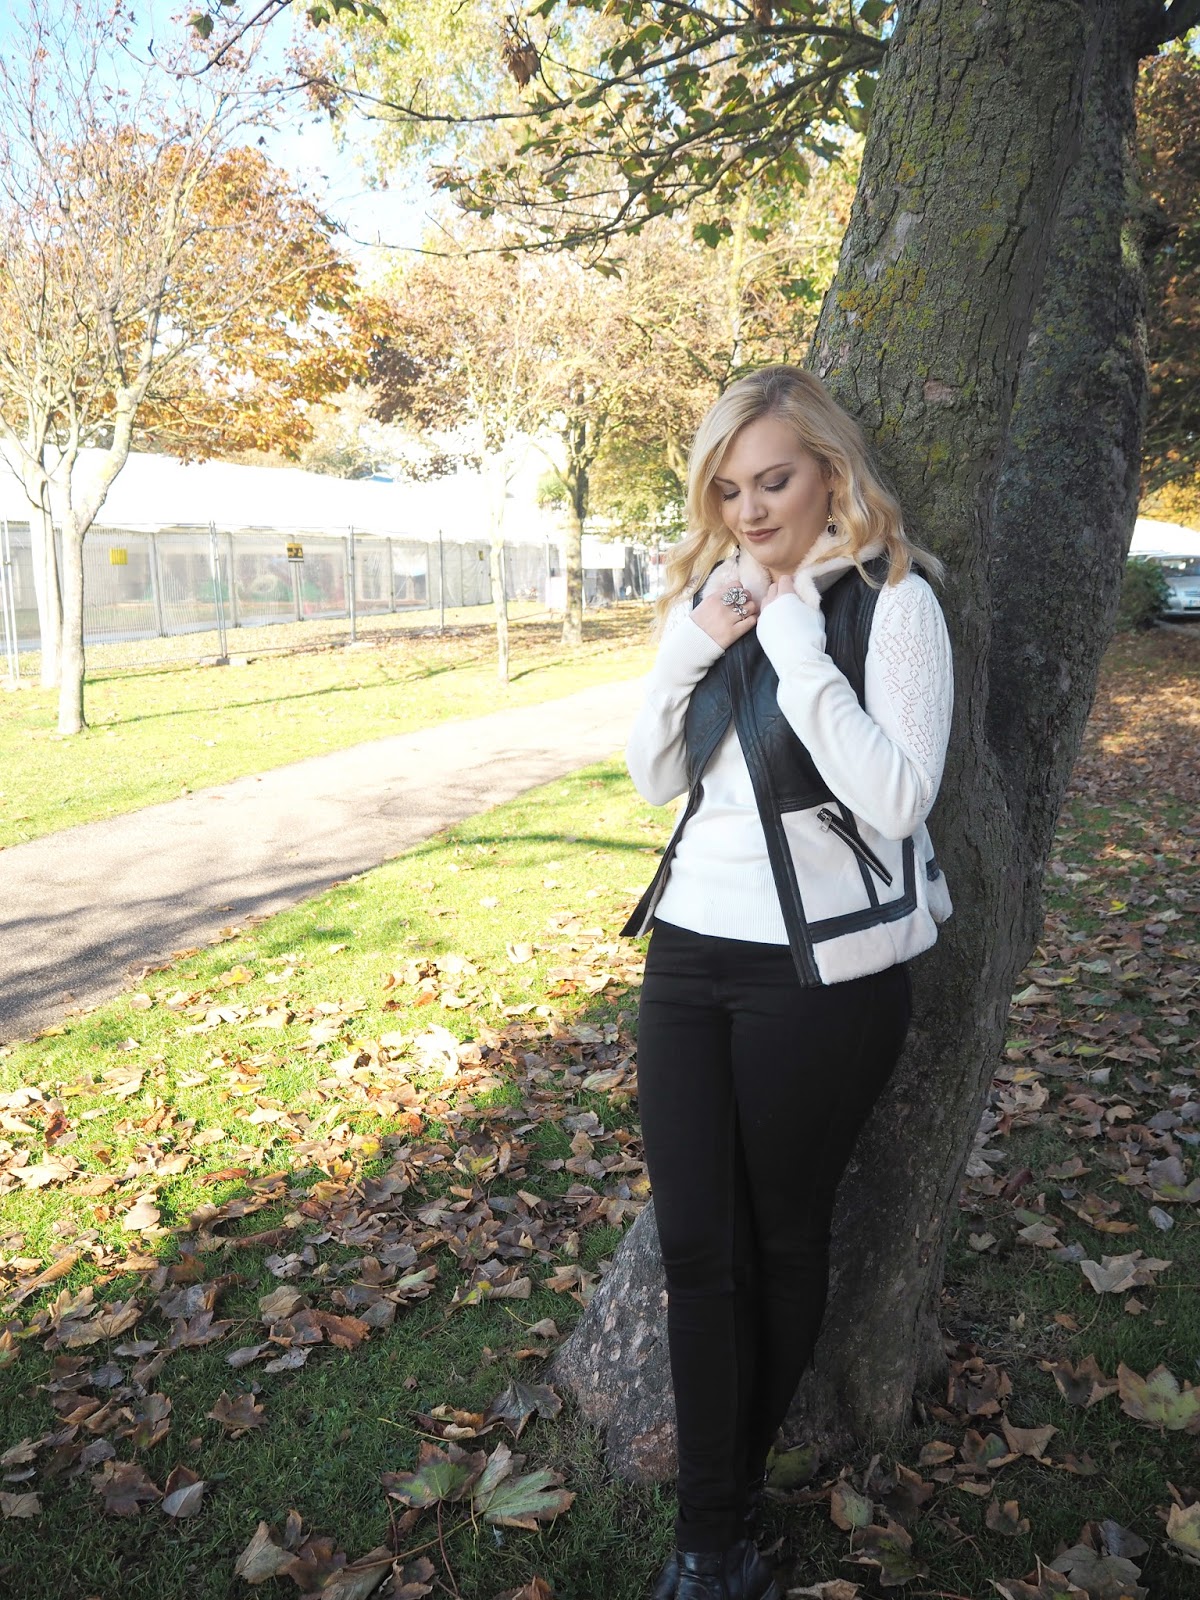 Monochrome Layering, Katie Kirk Loves, Outfit Ideas, Monochrome Fashion, Fashion Layering, Oasis Fashion, Fashion Blogger, UK Fashion Blogger, Outfit Of The Day, Style Blogger, Outfit Photoshoot, UK Blogger, UK Fashion Blogger